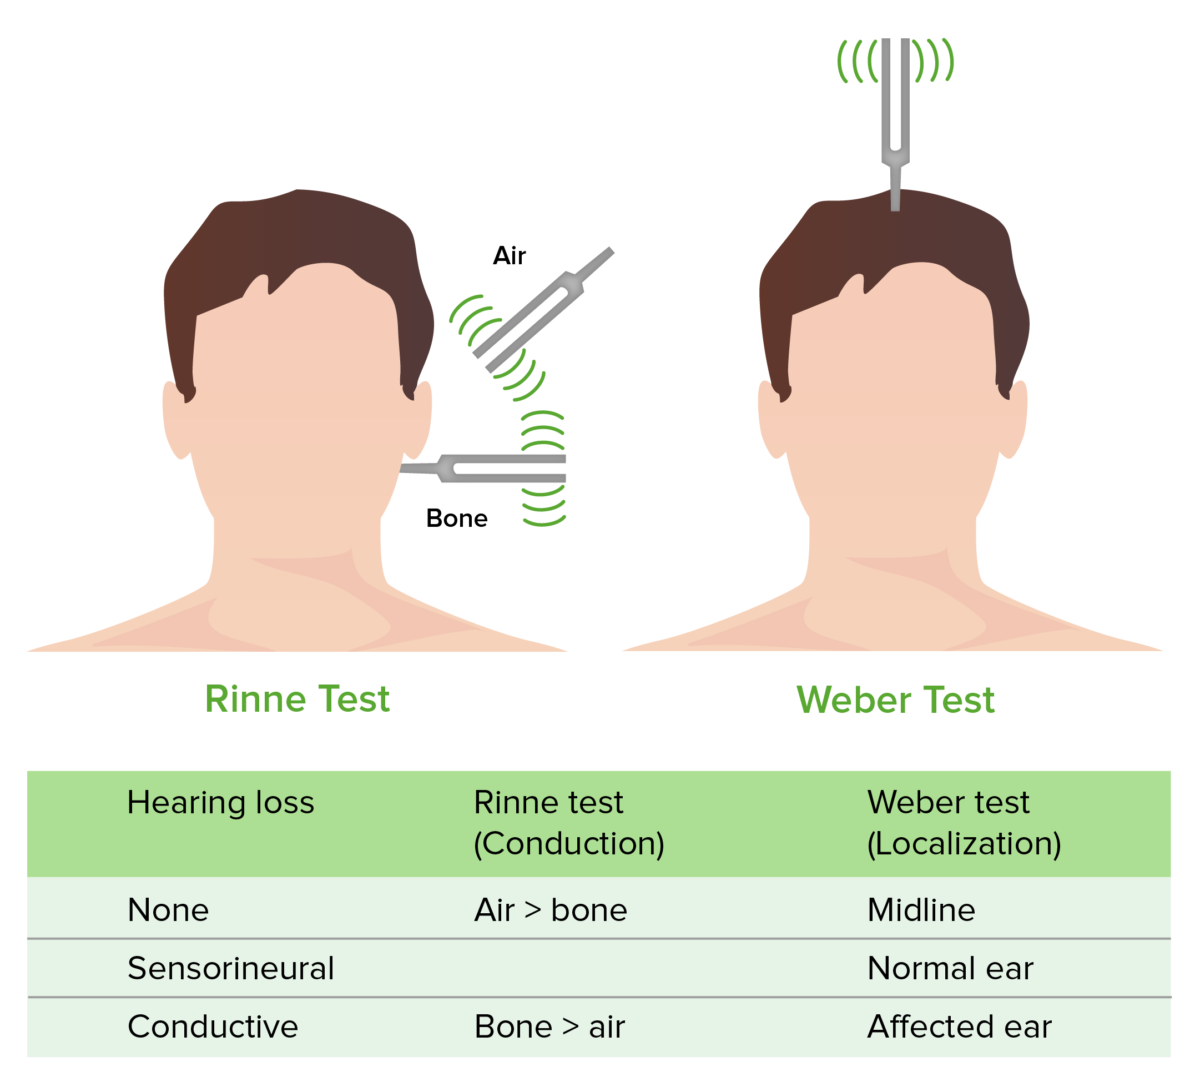 Rinne and weber tests